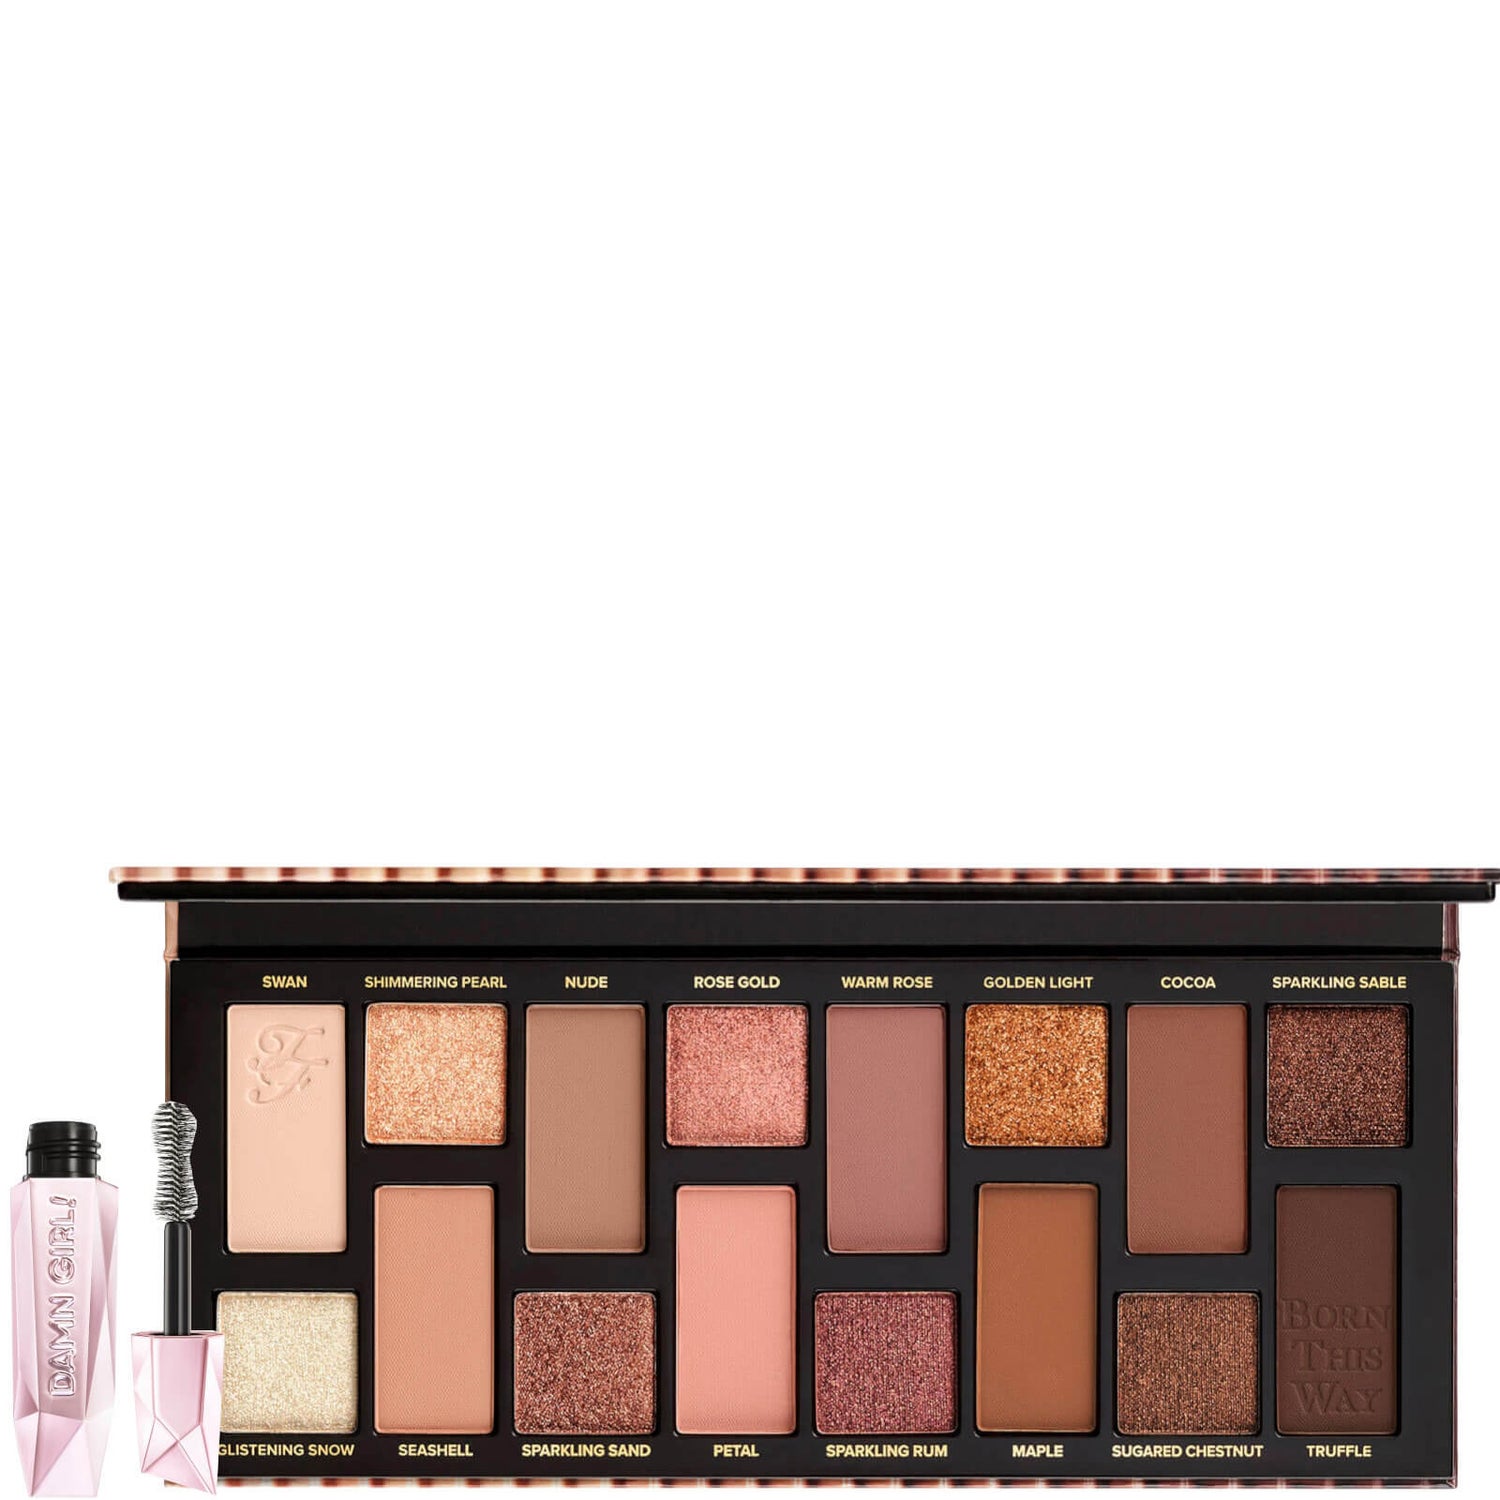 Too Faced Born This Way Natural Nudes Eyeshadow Palette and Damn Girl! Mascara Bundle (Worth £47.00)